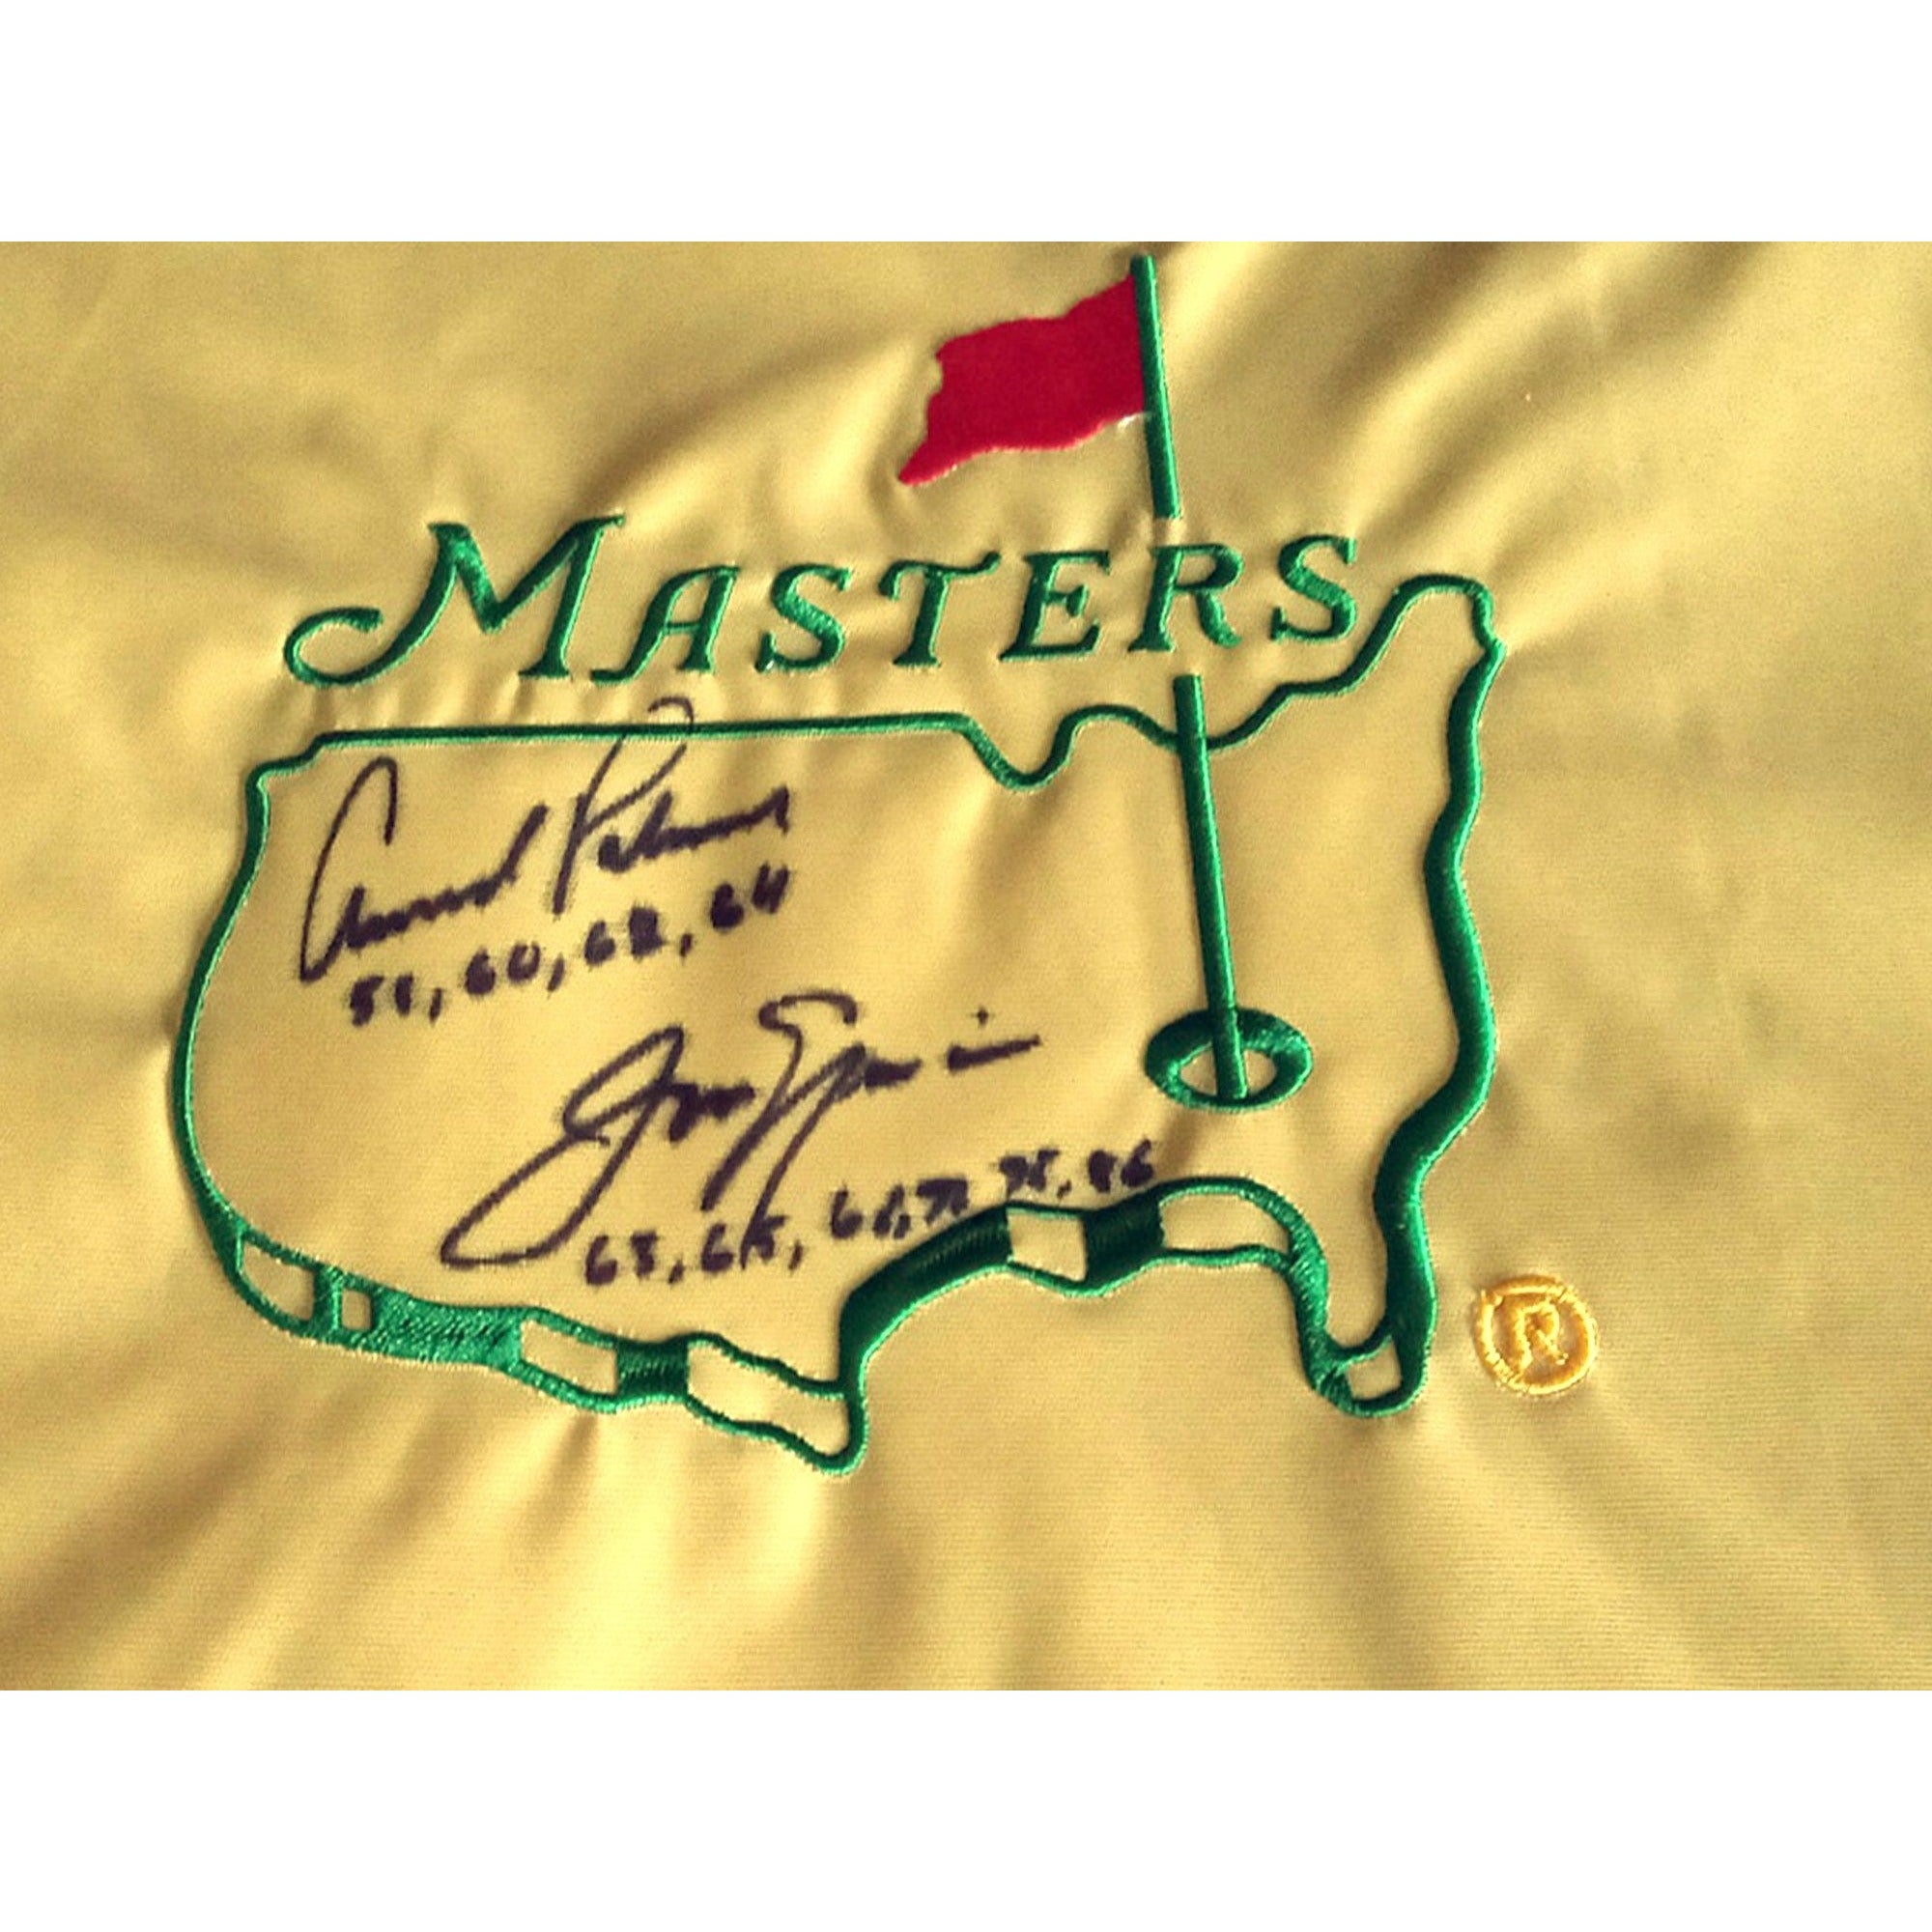 Jack Nicklaus and Arnold Palmer signed and inscribed Masters pin flag with proof